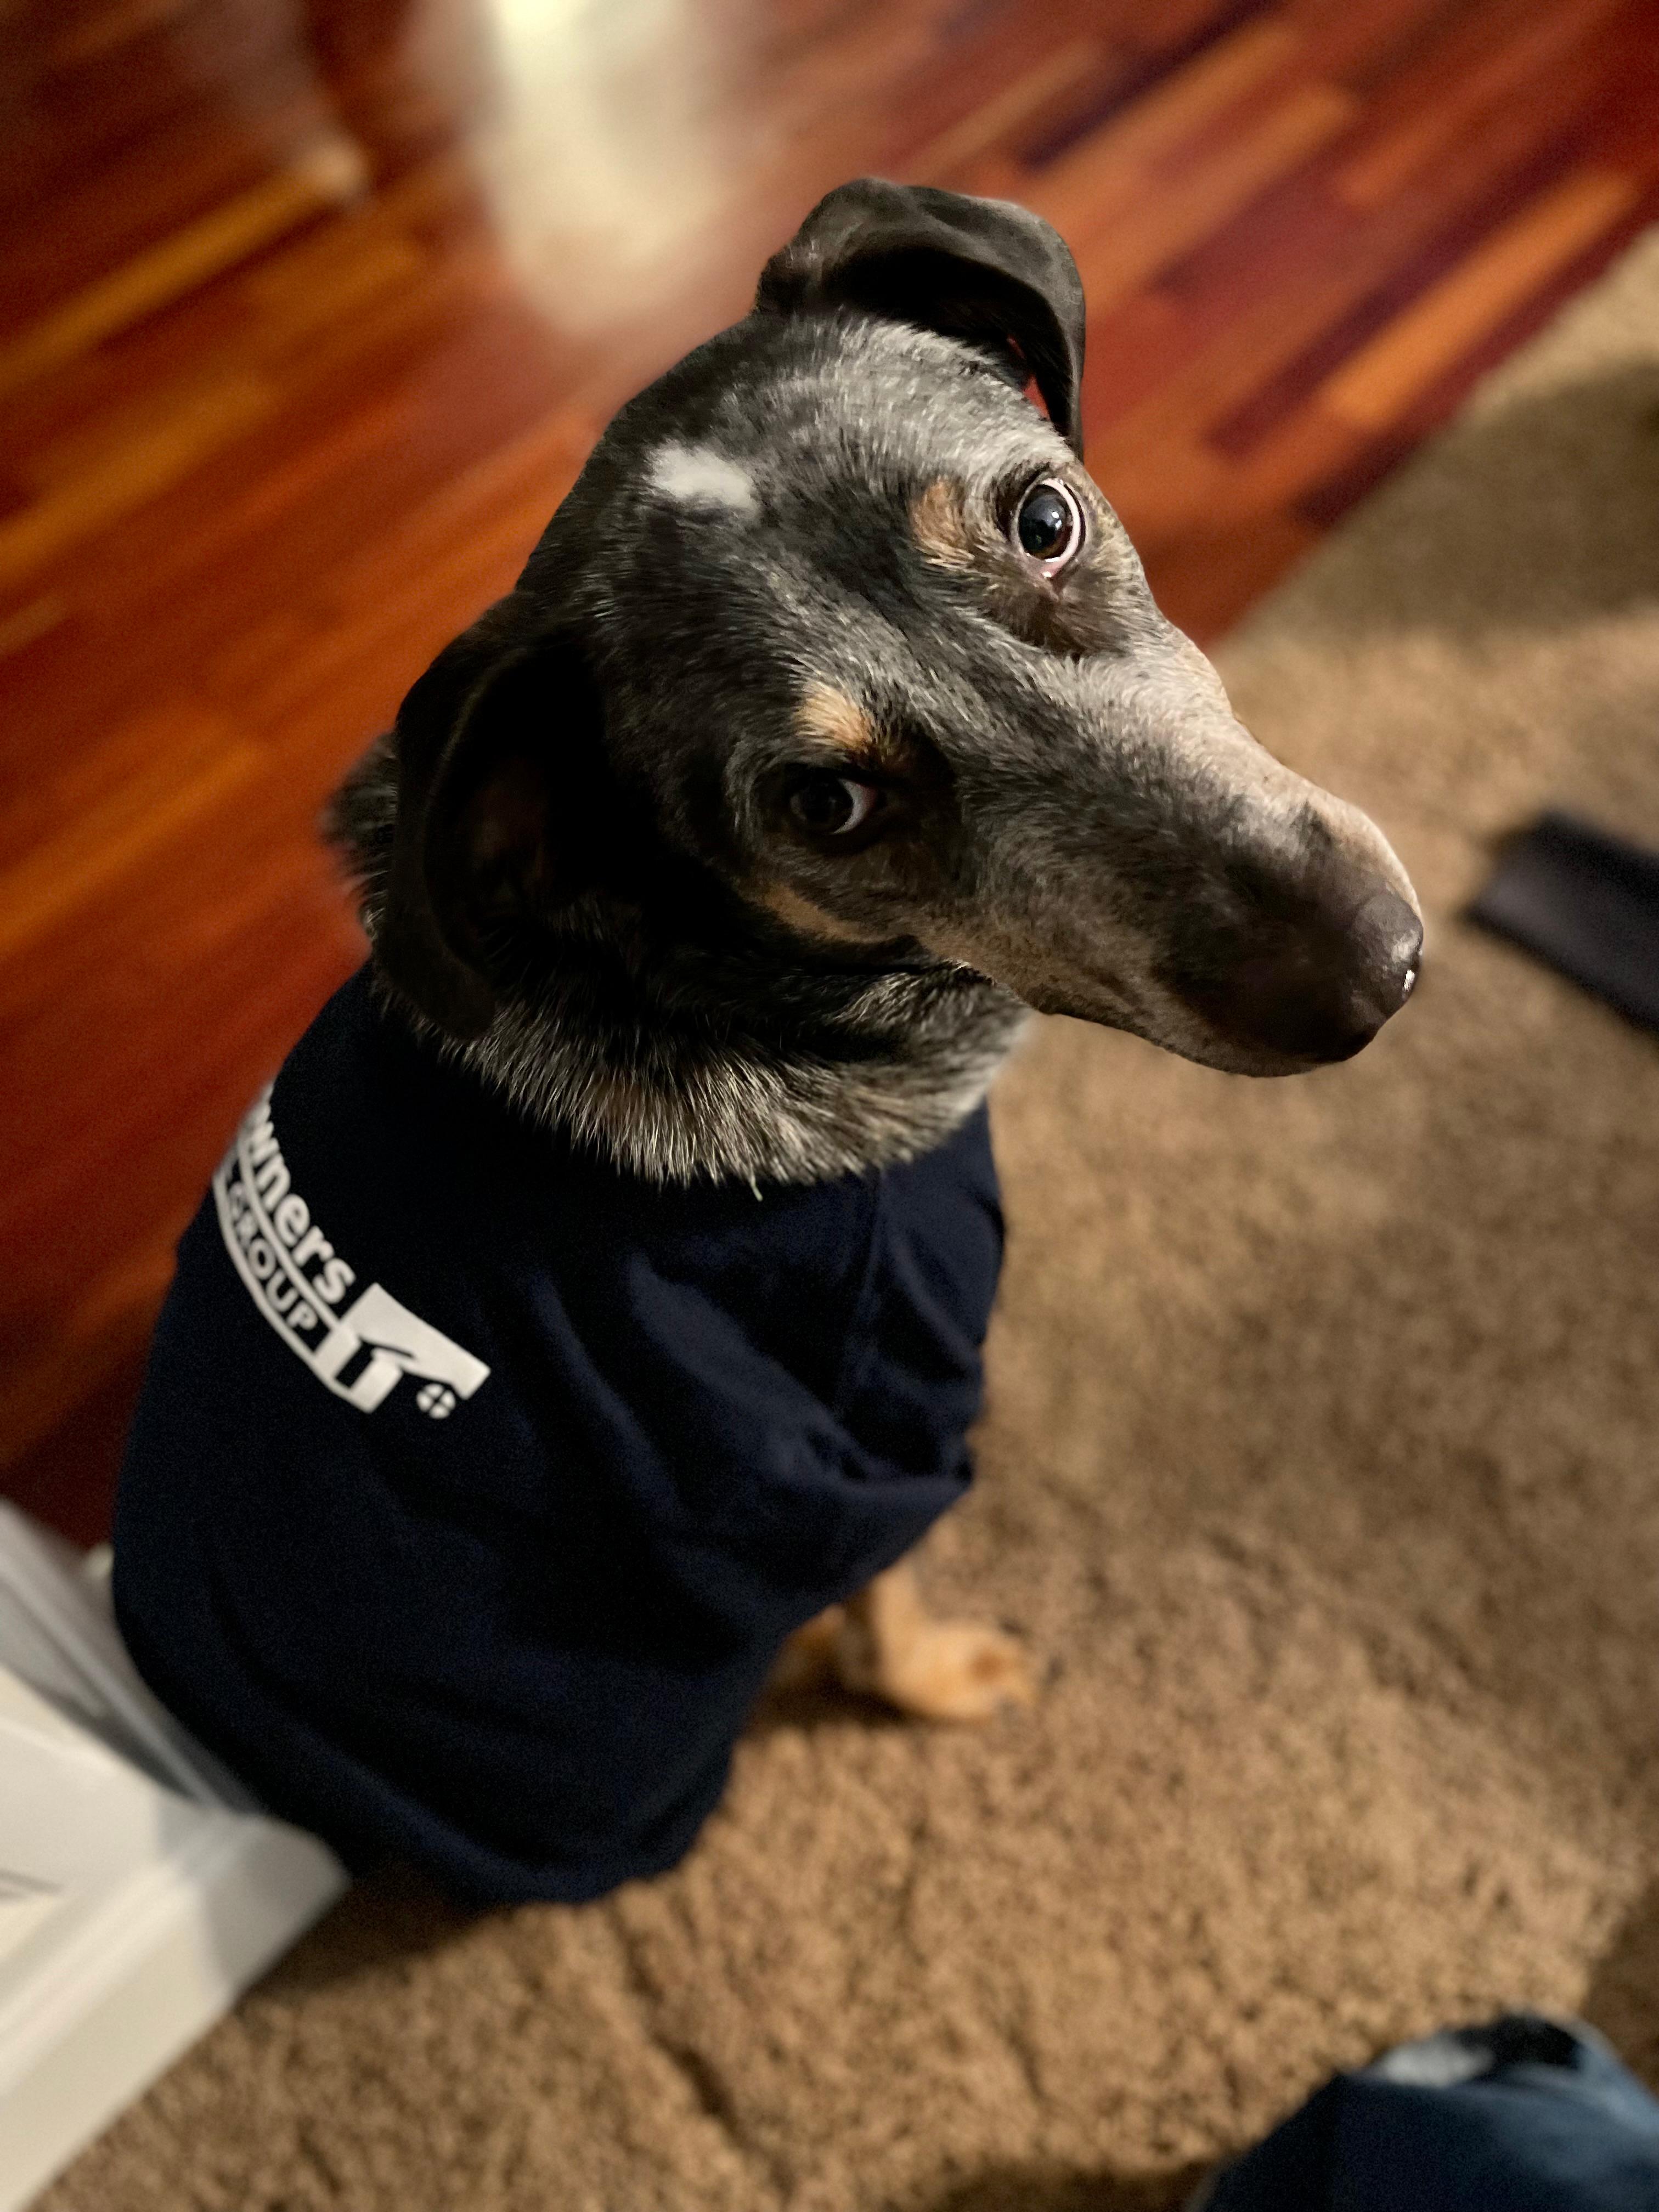 Our Homeowners gear isn't just for humans. Pets look great in it too, actually!